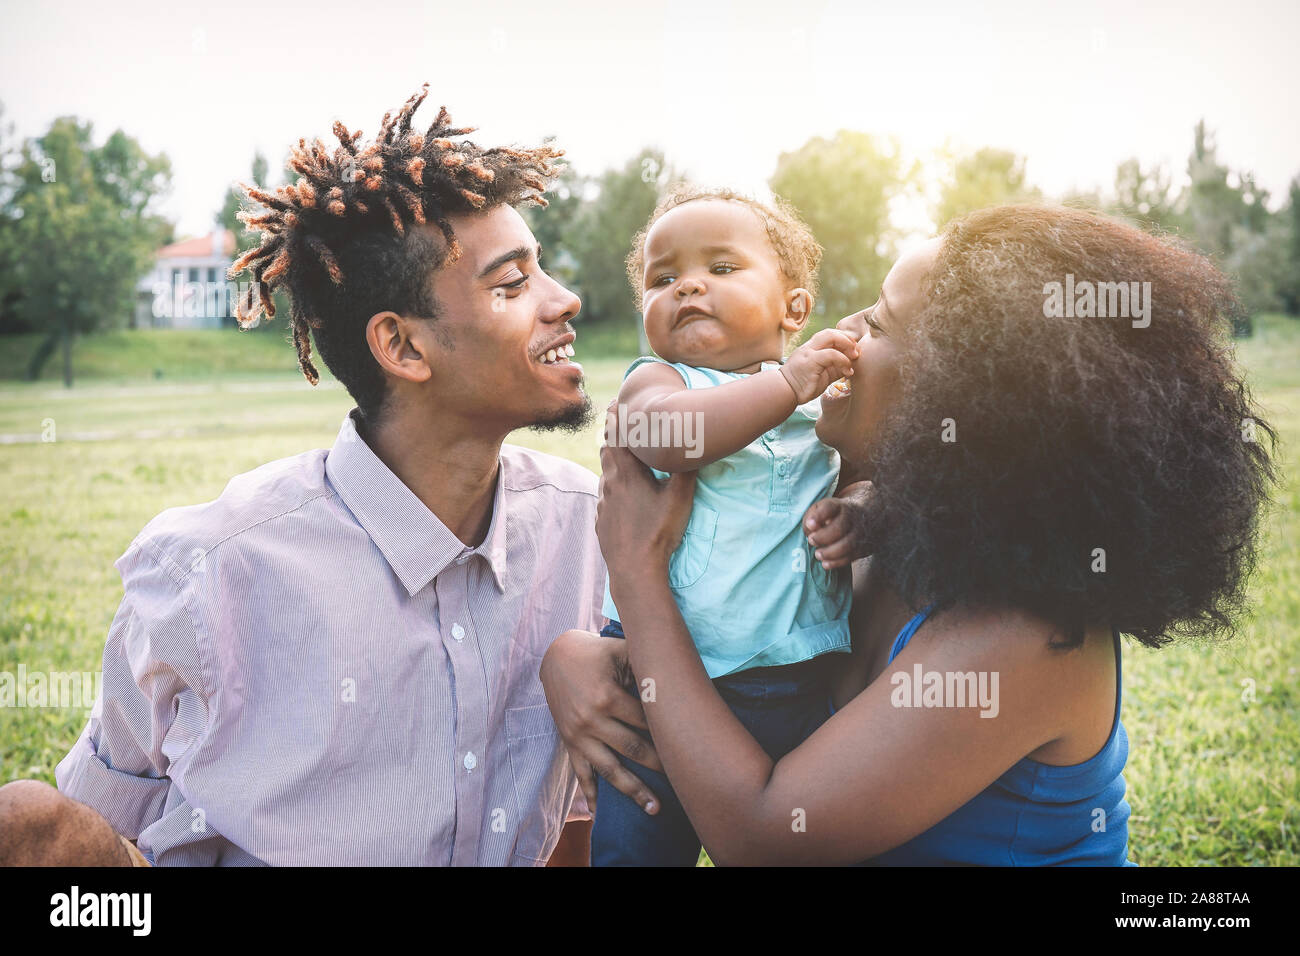 Happy black family enjoying a tender moment during the weekend outdoor - Mother and father having fun with their daughter in a public park Stock Photo